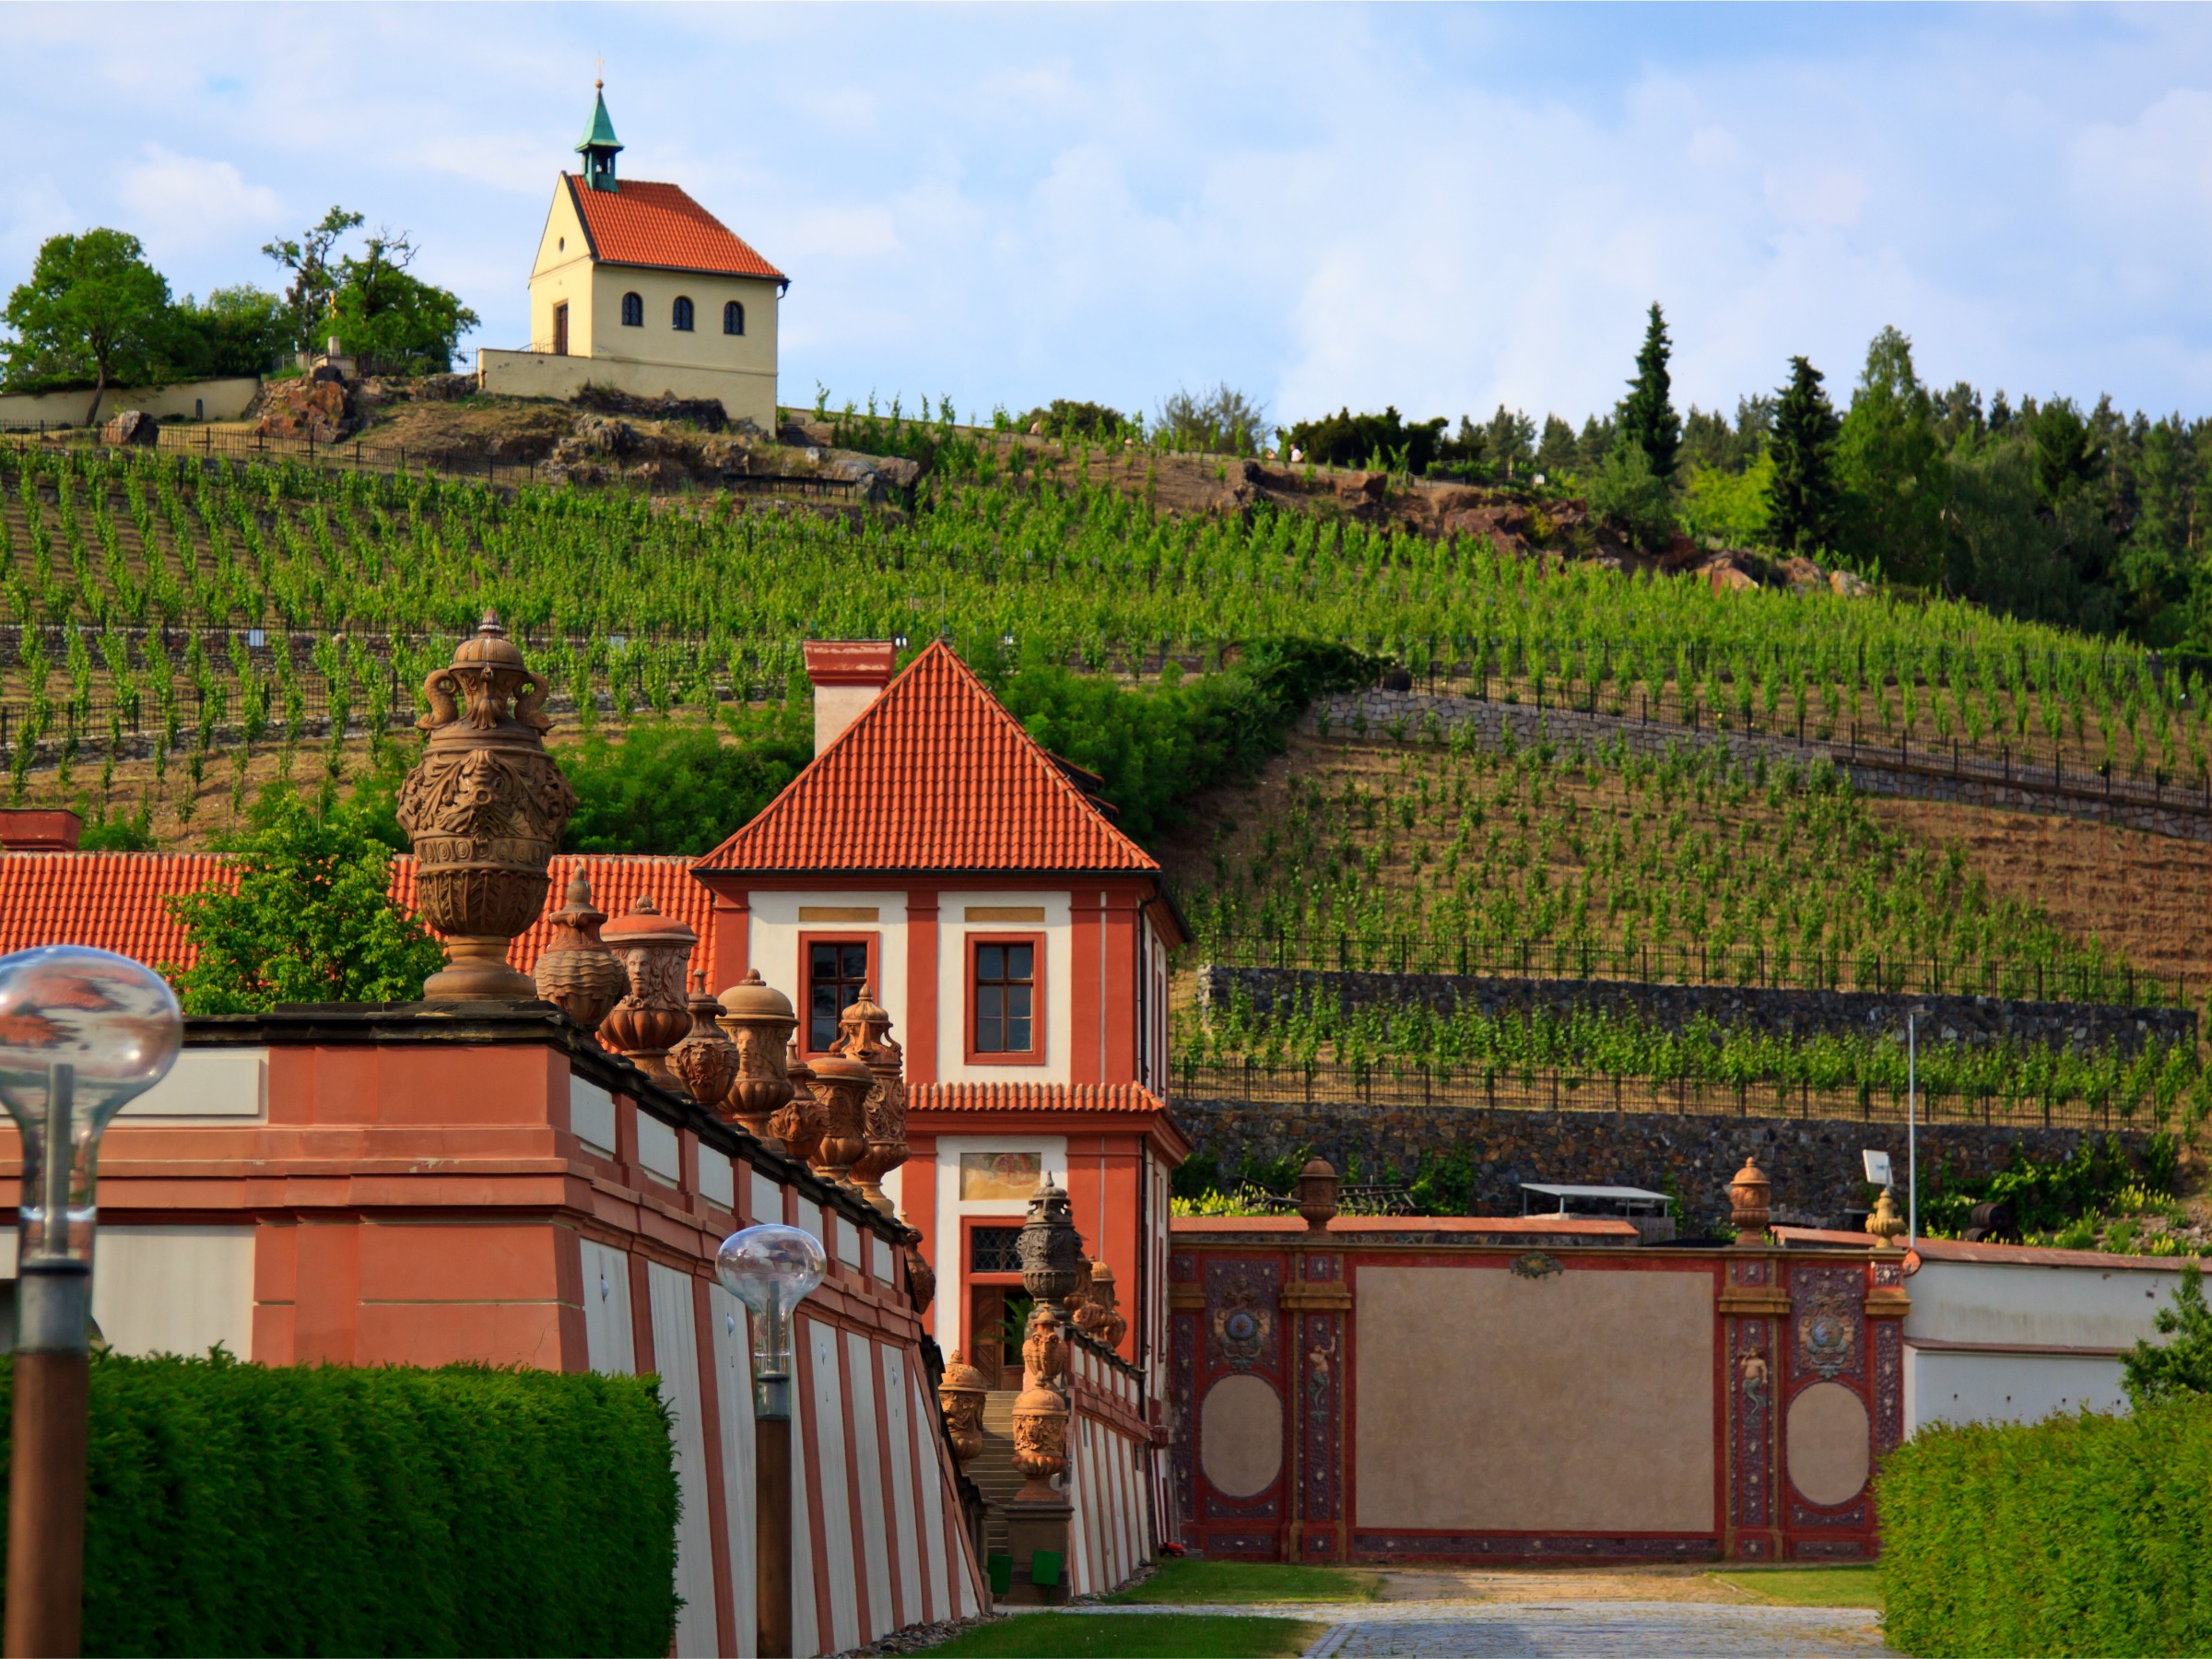 This image shows St. Claire Chapel at the top of a hill planted with grapevines. In the foreground, Troja Chateau amidst one of the most beautiful vineyards in Prague.